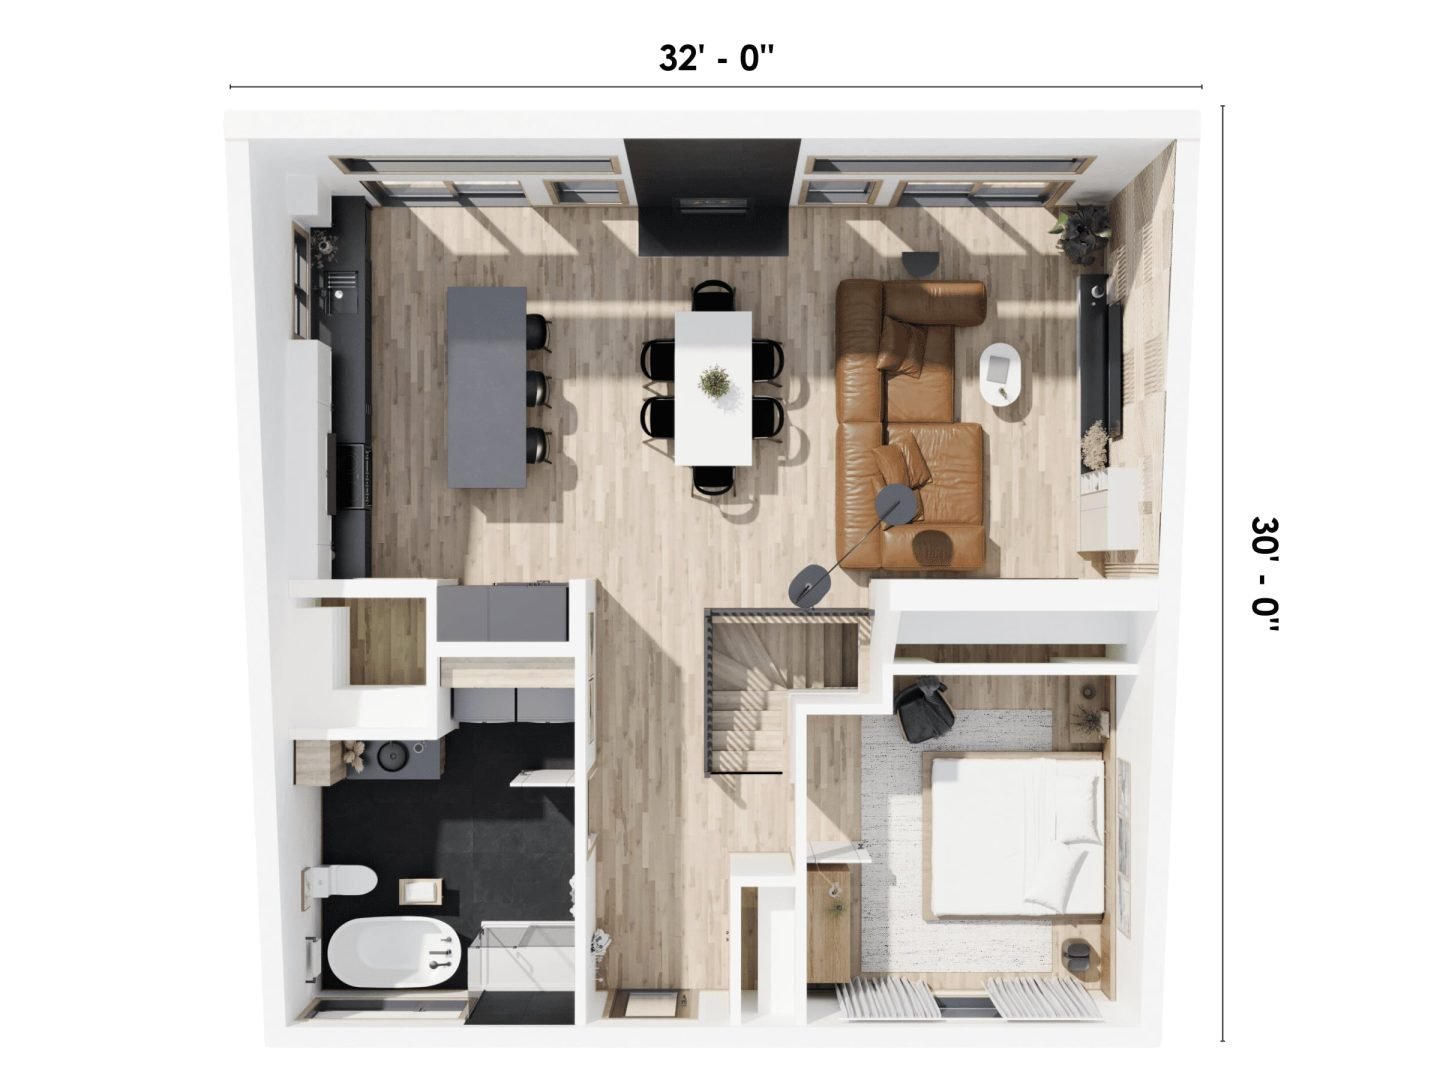 Chalet model called Horizon. Contemporary styling seen from the 3D plan with measurements.